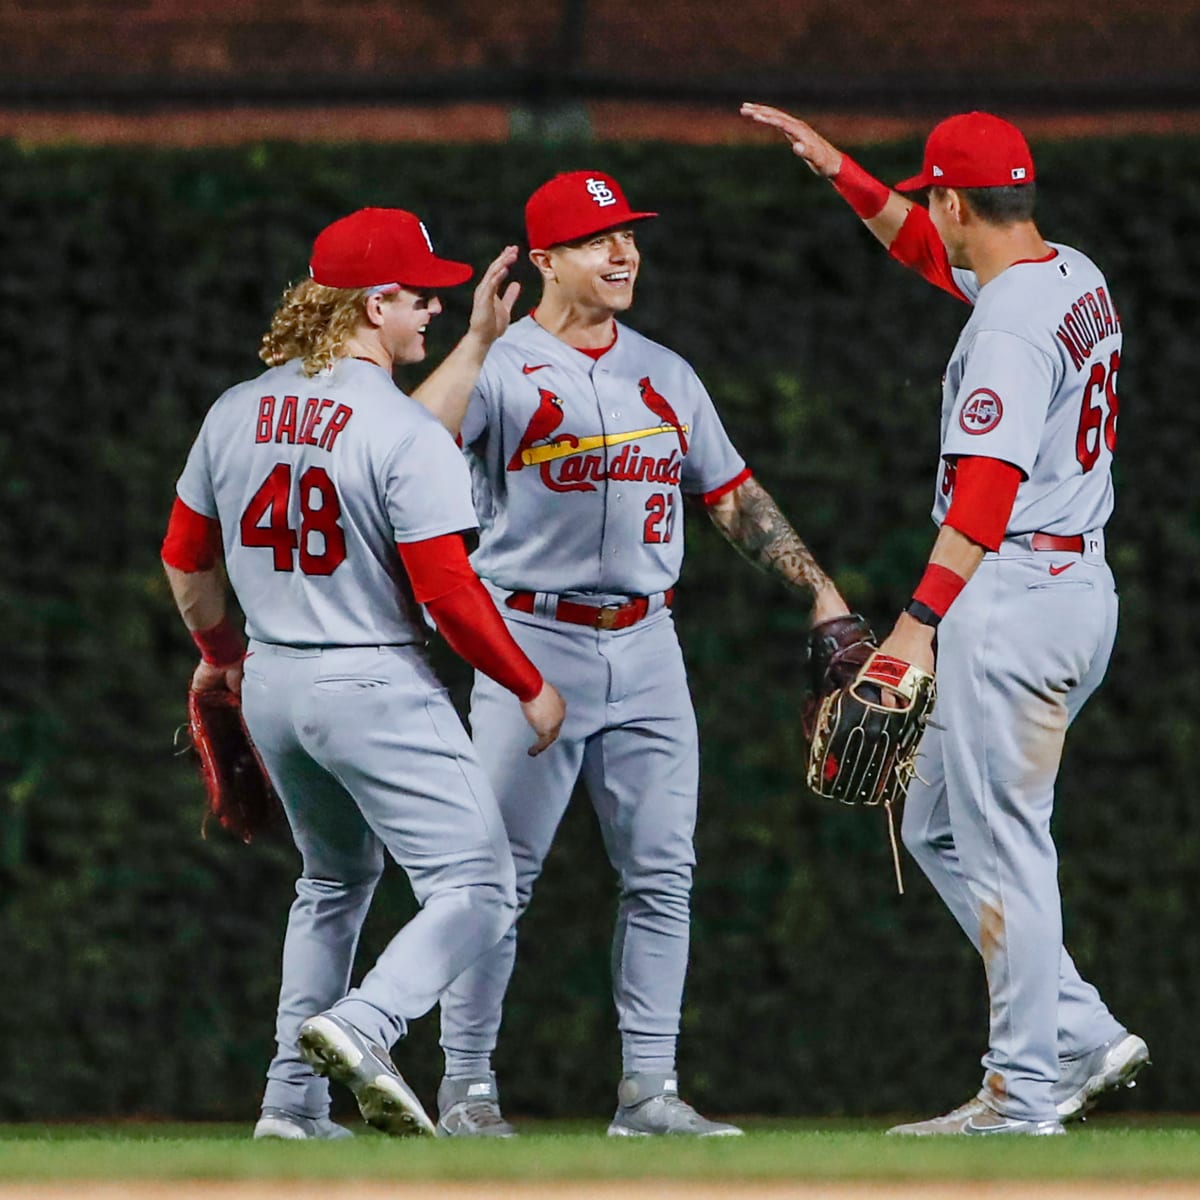 St. Louis Cardinals vs. Chicago Cubs 9/25/21 - MLB Live Stream on